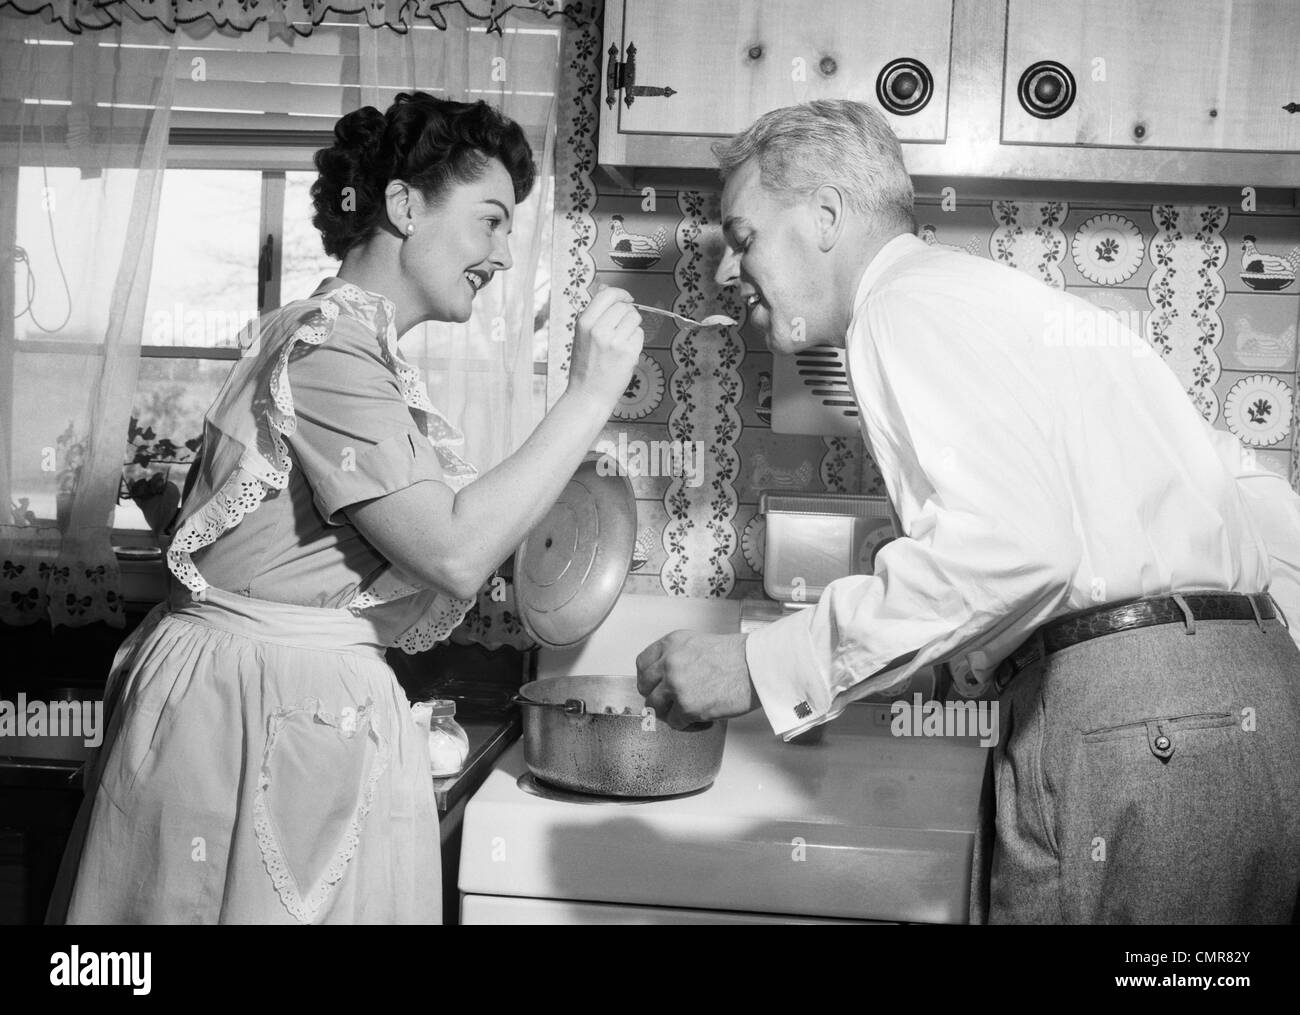 1950s HOUSEWIFE IN KITCHEN HAVING HUSBAND TASTE FOOD ON STOVE Stock Photo